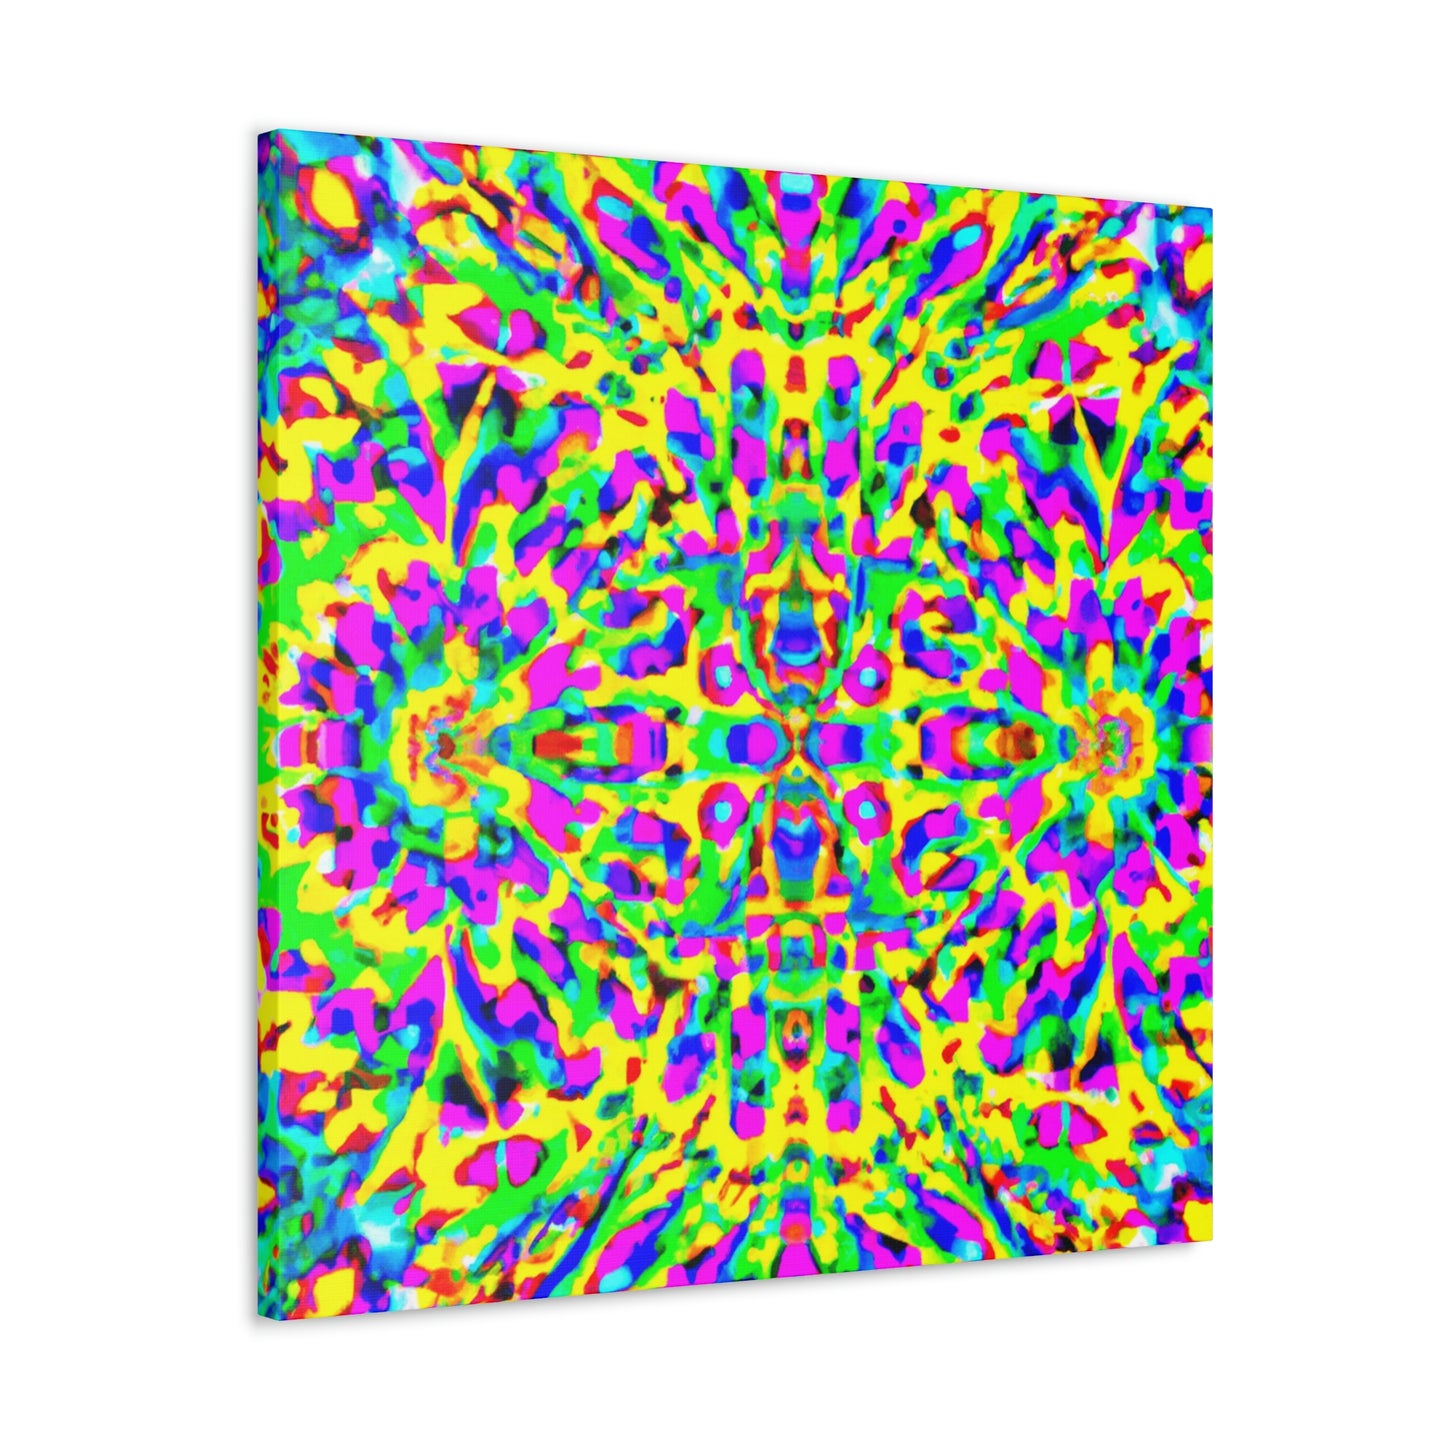 Josiah Fritchey - Psychedelic Canvas